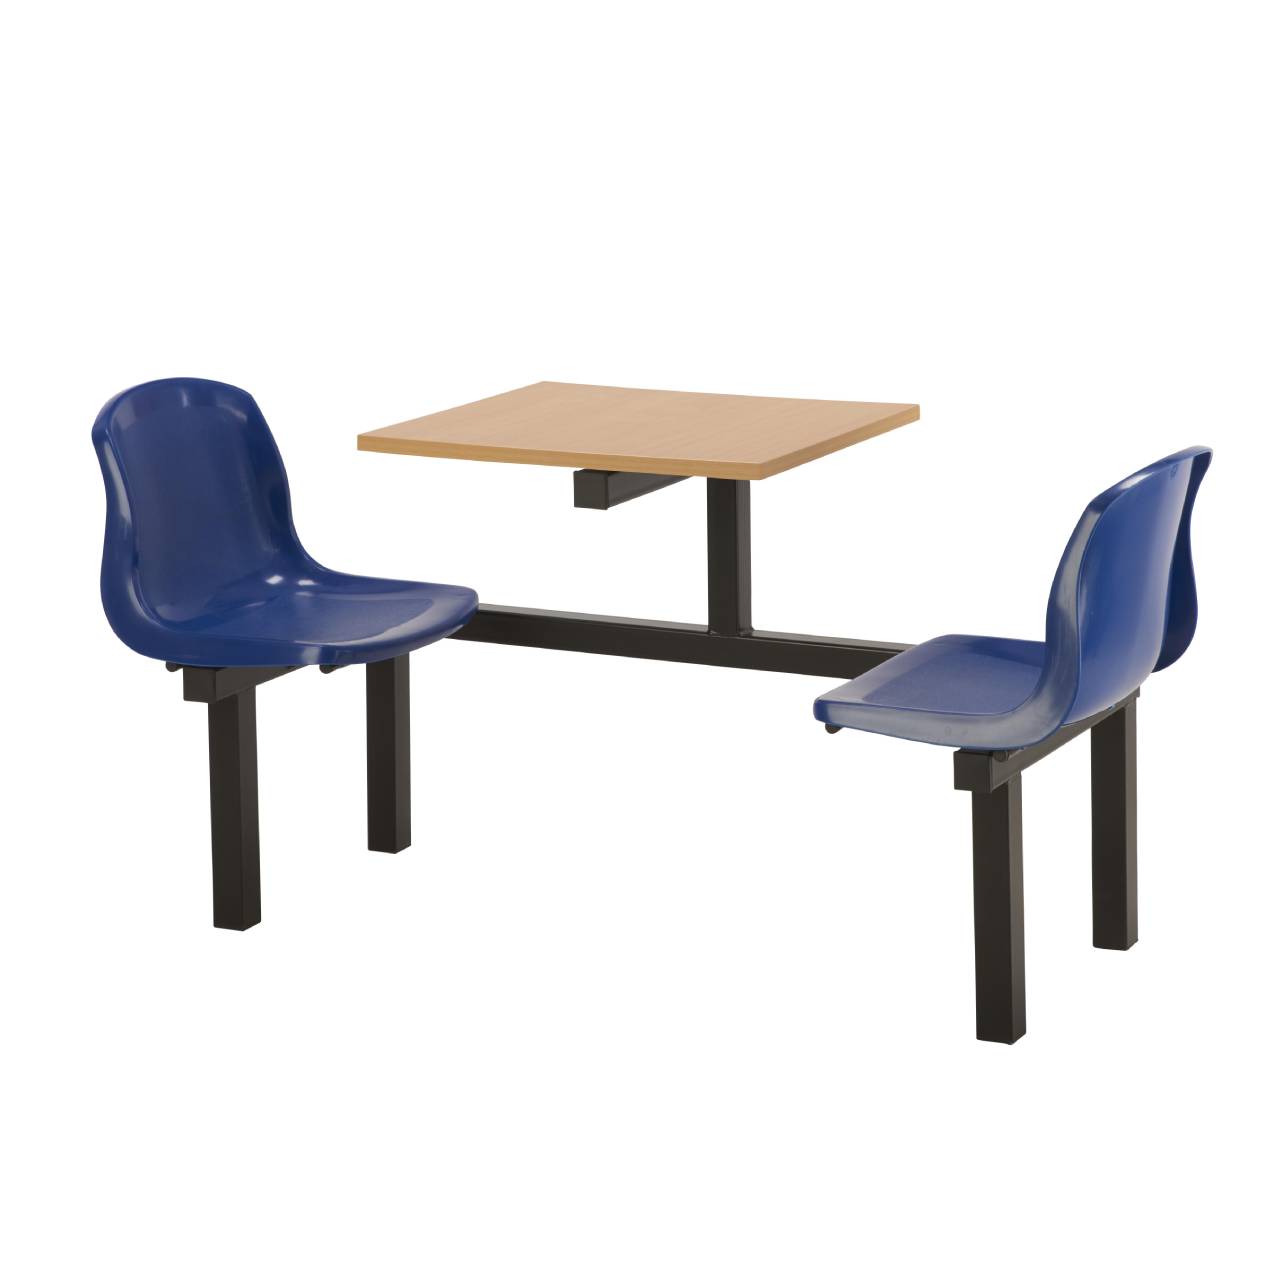 Harvey 2 Seater Fixed Canteen Seating - Table and Chairs - Single Entry Blue Beech